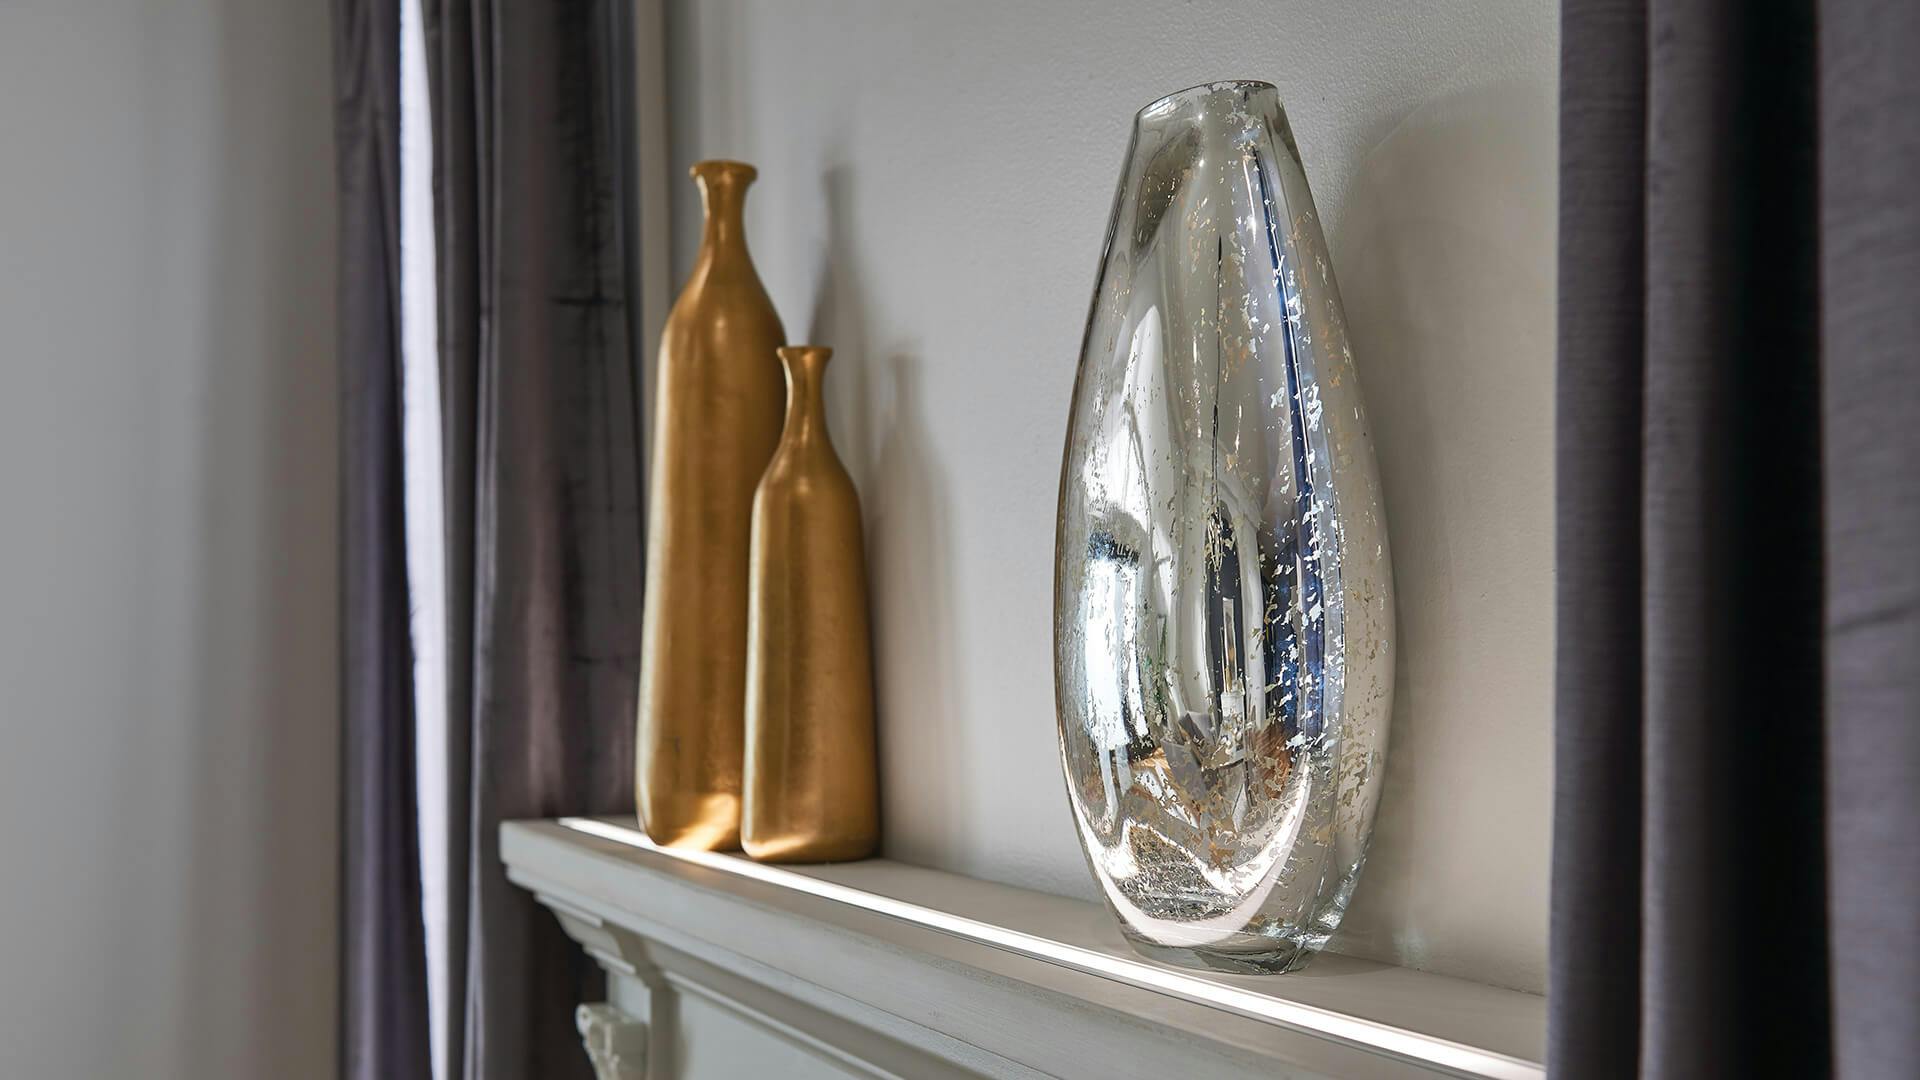 Gold and silver unique shaped vases on a mantle between two windows